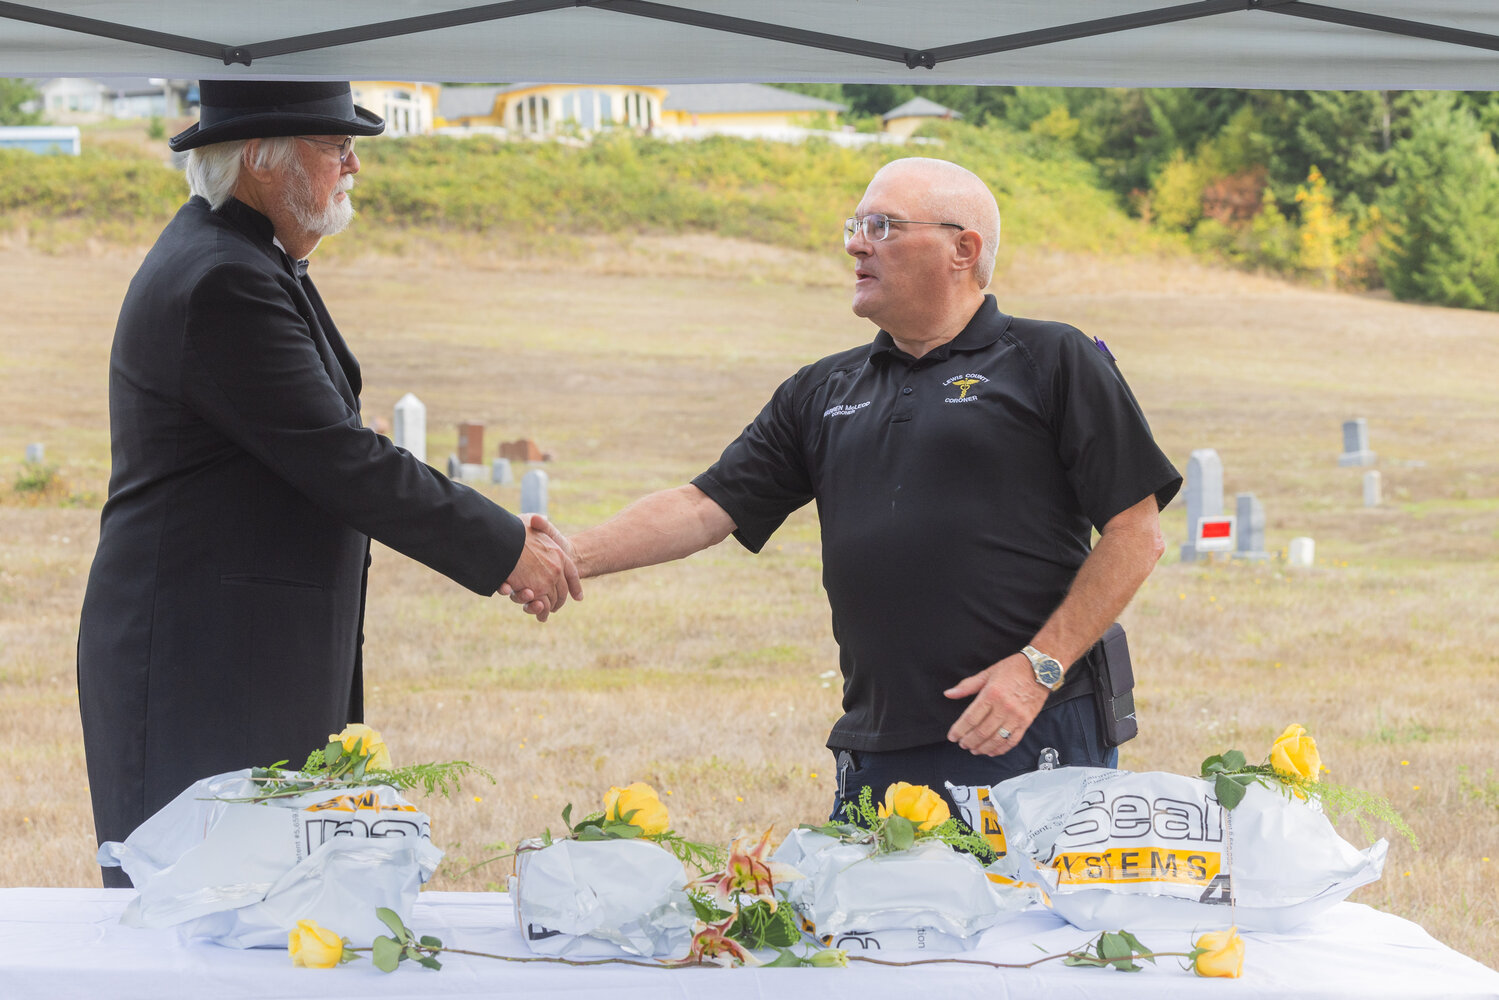 John Panesko, left, shakes hands with Lewis County Coroner Warren McLeod during a ceremony in Chehalis honoring unclaimed remains on Thursday, Sept. 28.